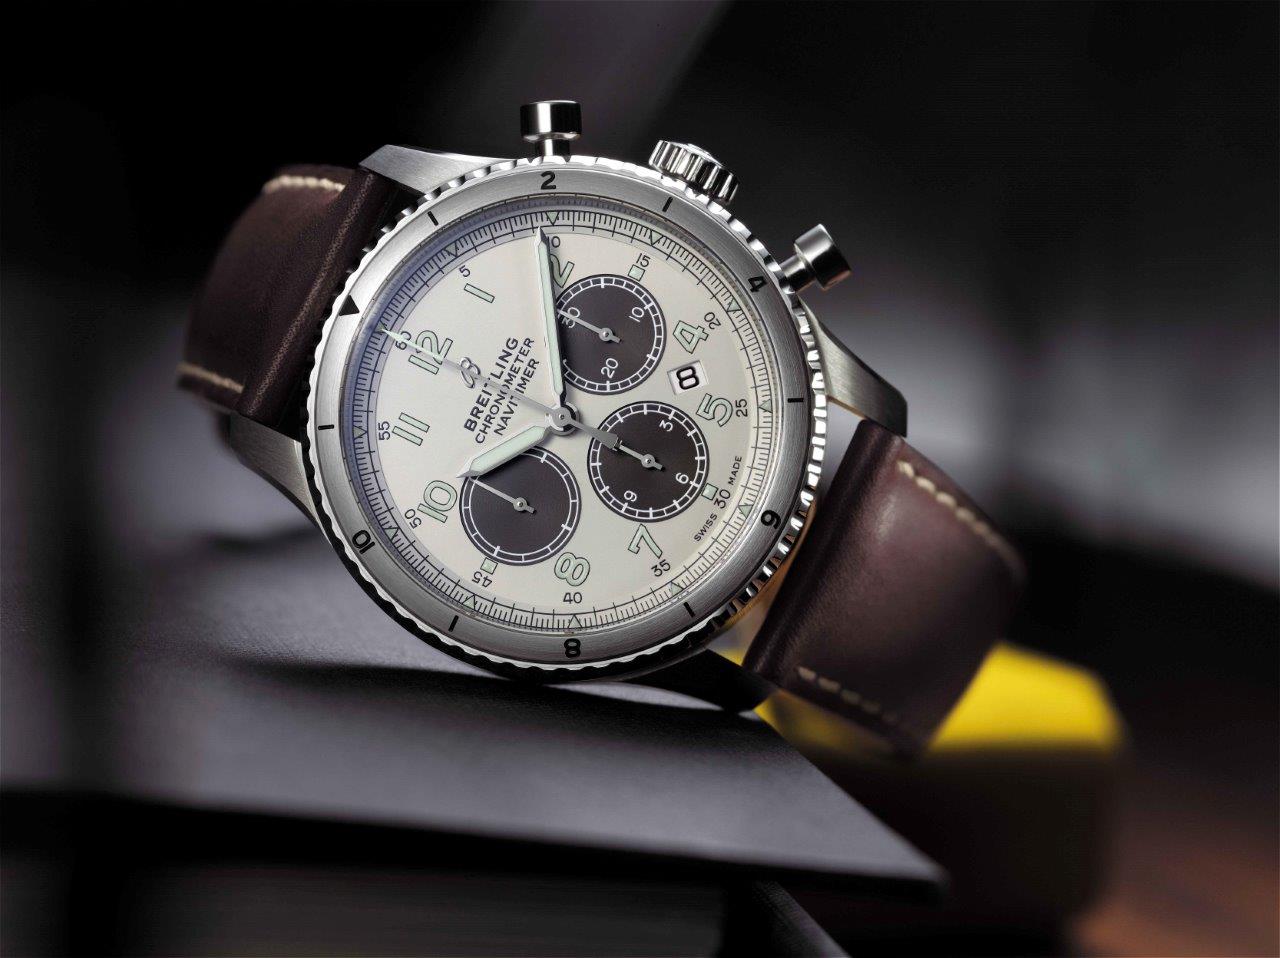 Whether for the identical appearance or the stable performance, this replica Breitling watch also can catch a lot of people's attention.